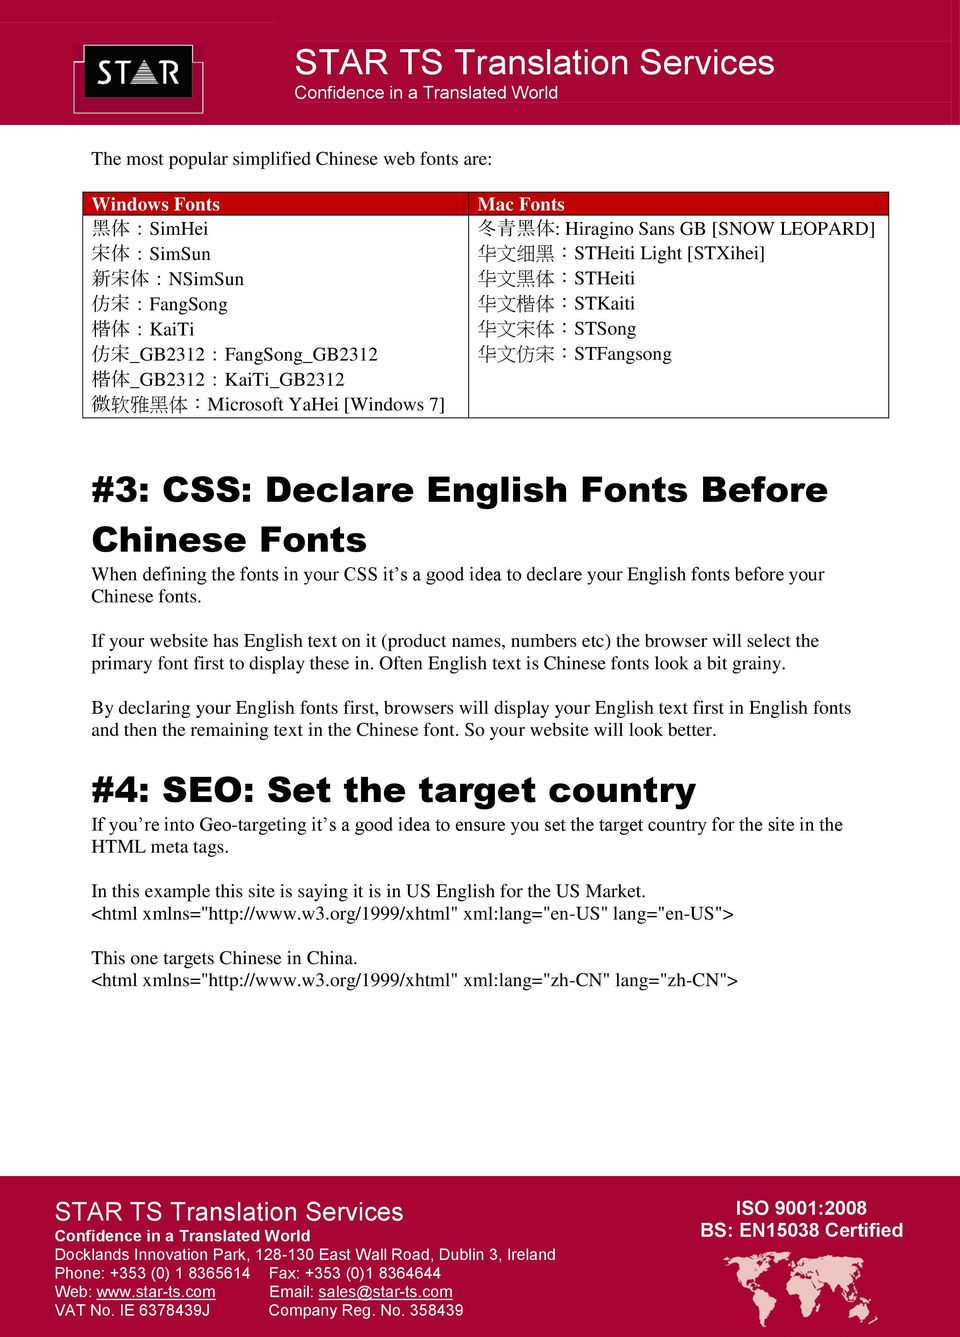 Declare English Fonts Before Chinese Fonts When defining the fonts in your CSS it s a good idea to declare your English fonts before your Chinese fonts.